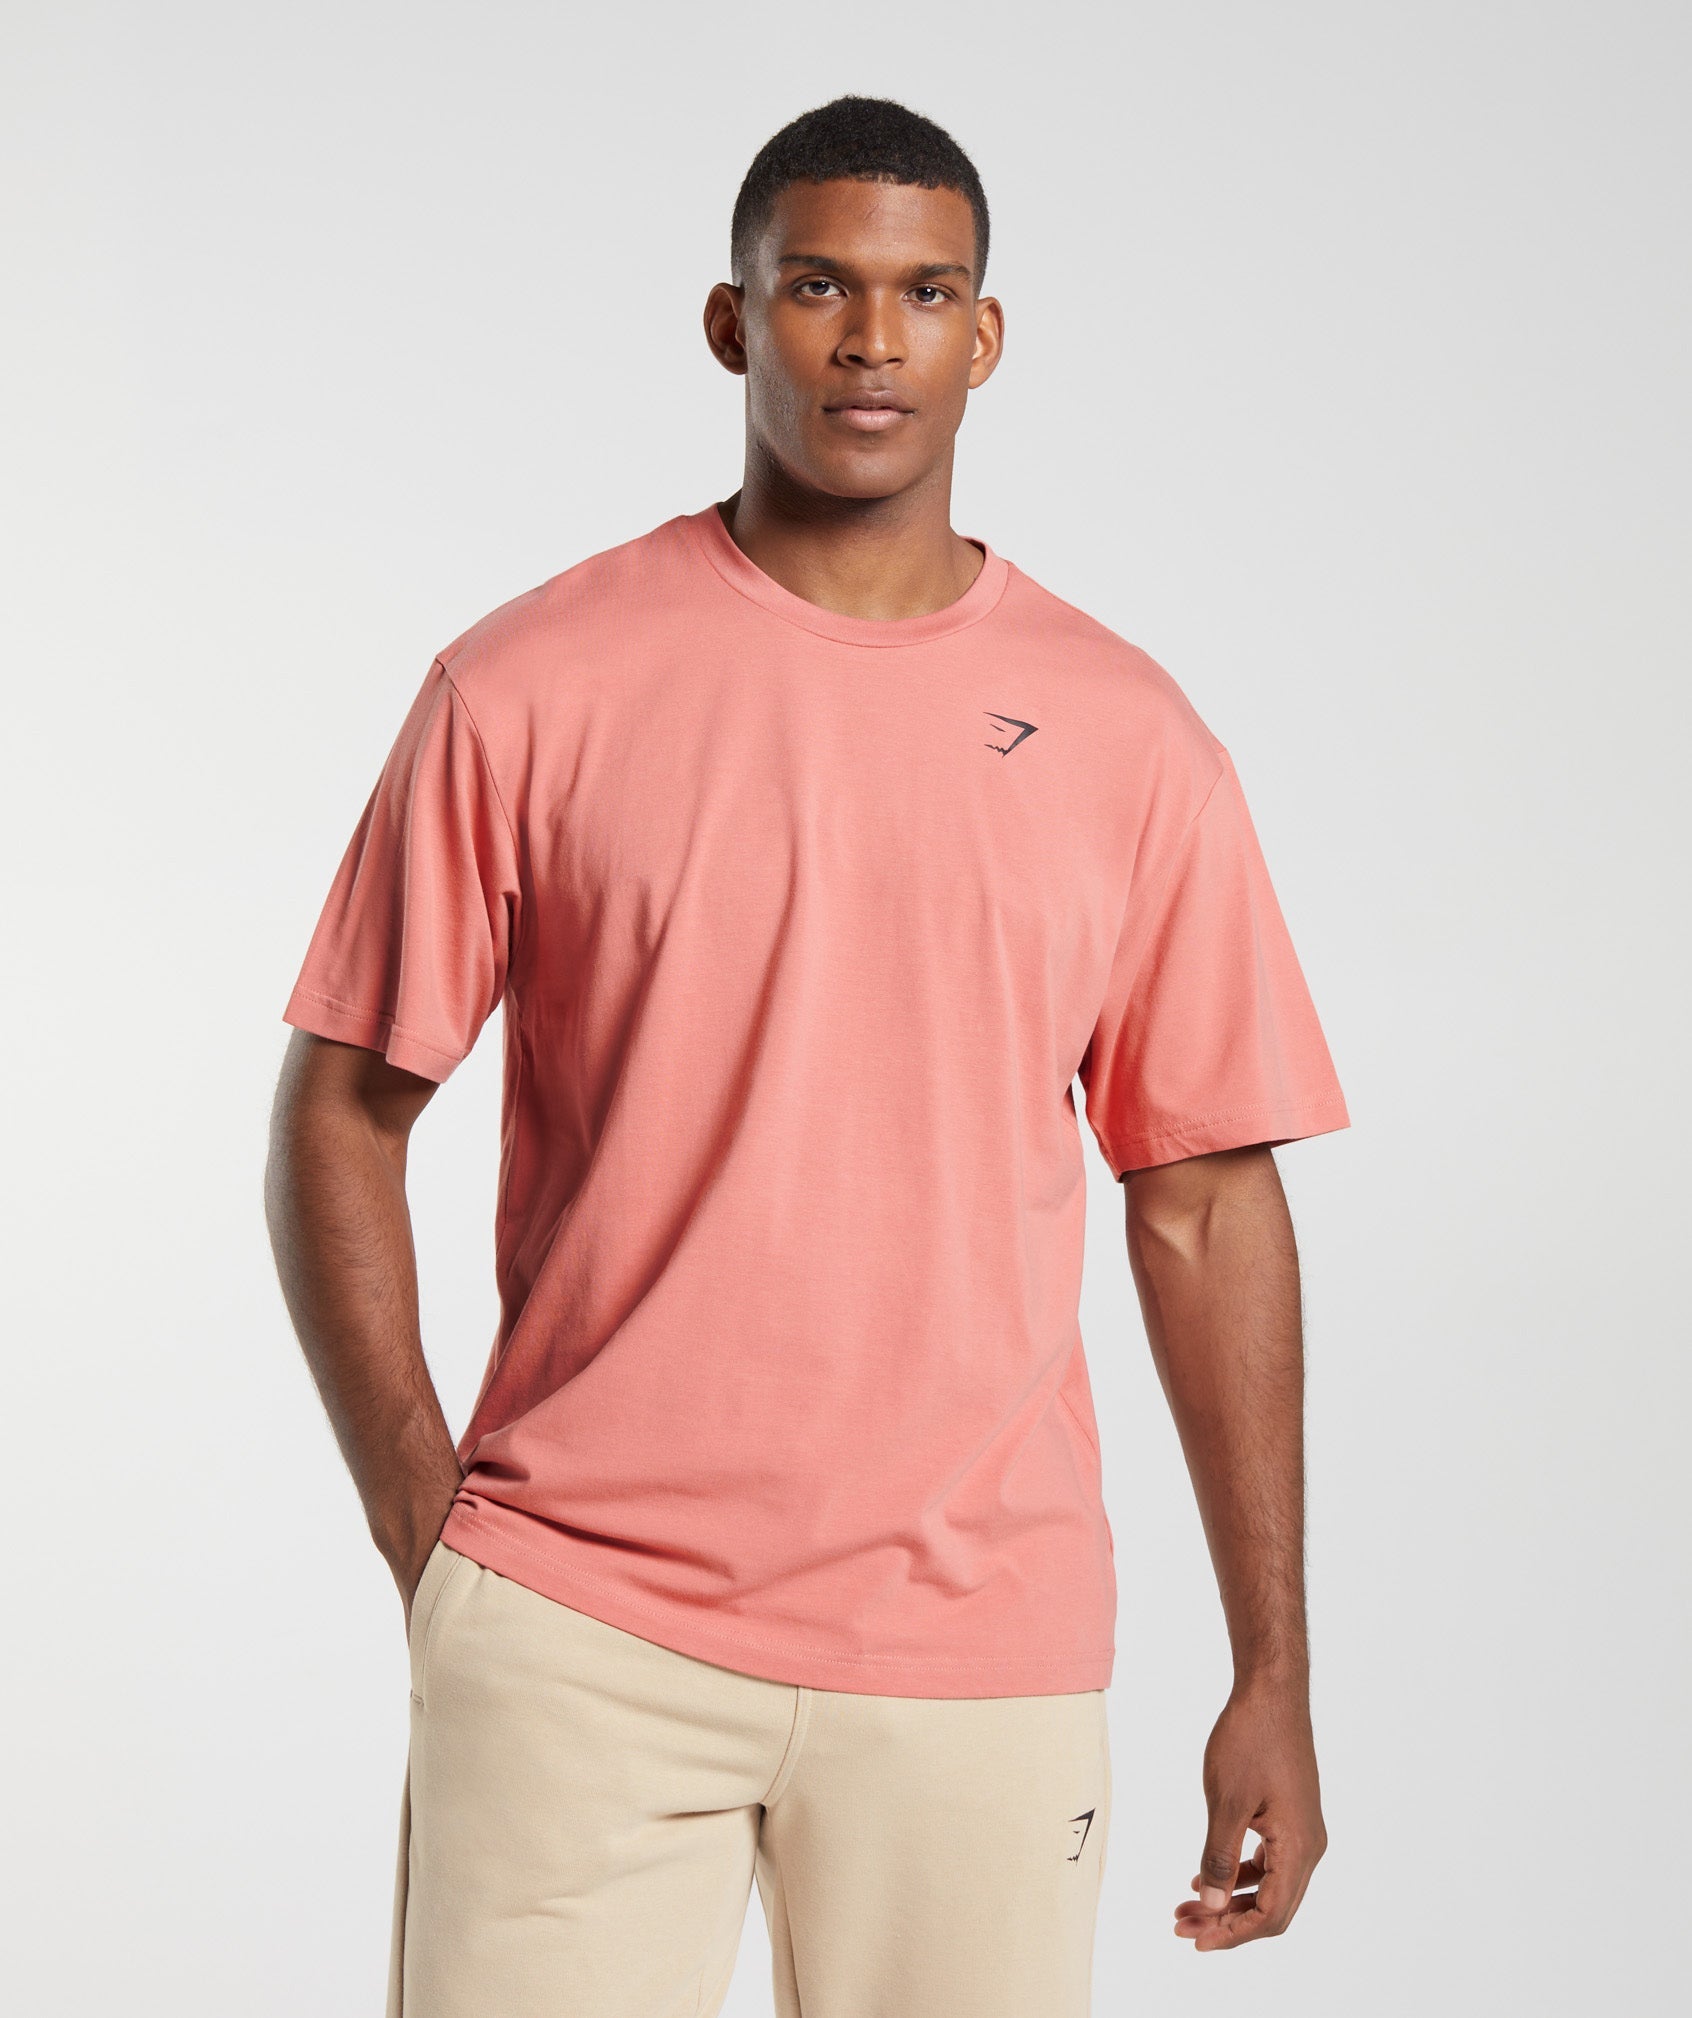 Essential Oversized T-Shirt in Terracotta Pink